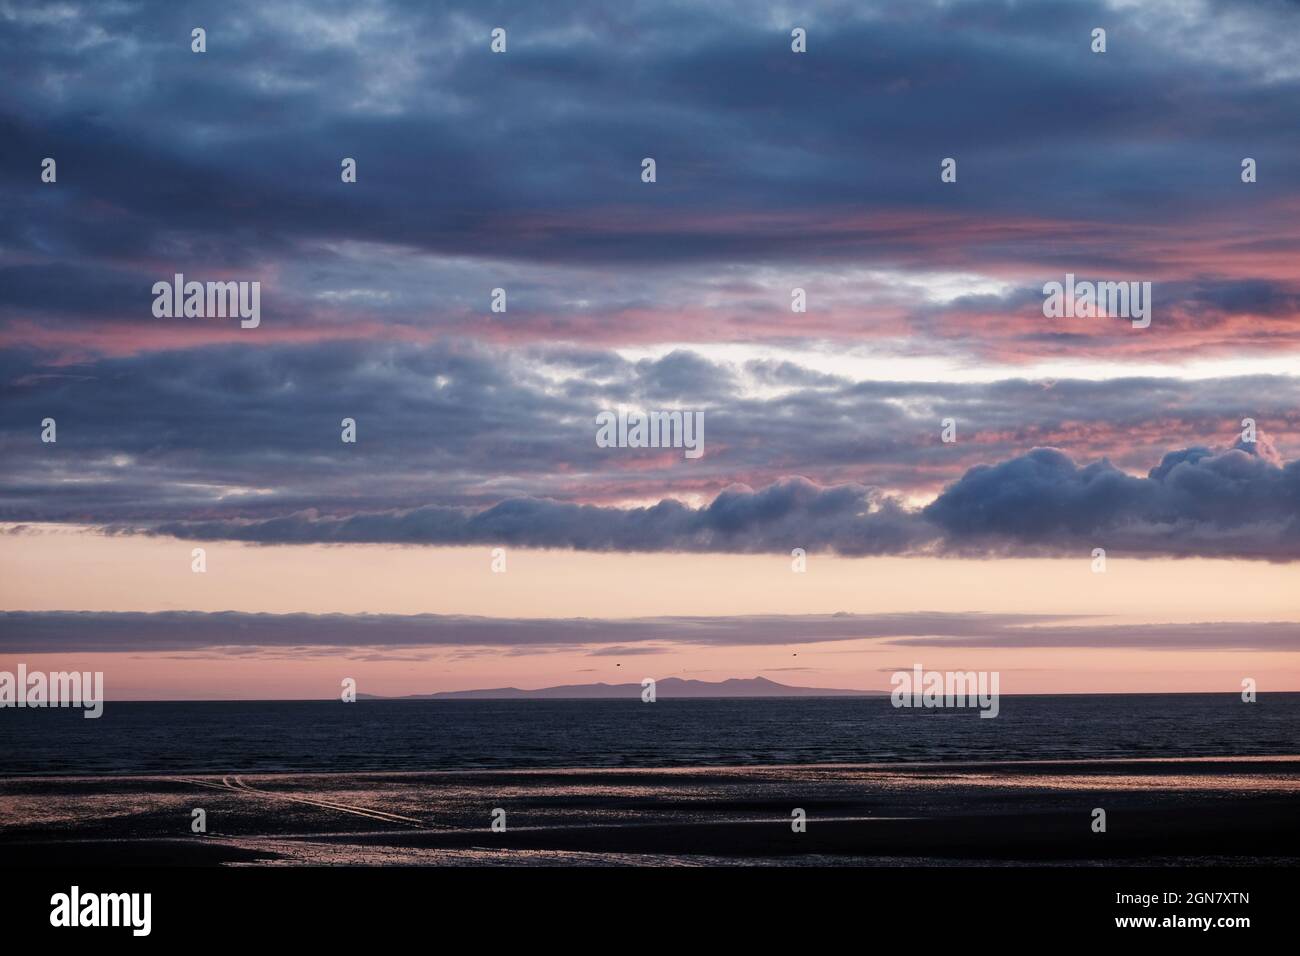 The Isle of Man from Seascale (Cumbria) at Sunset Stock Photo